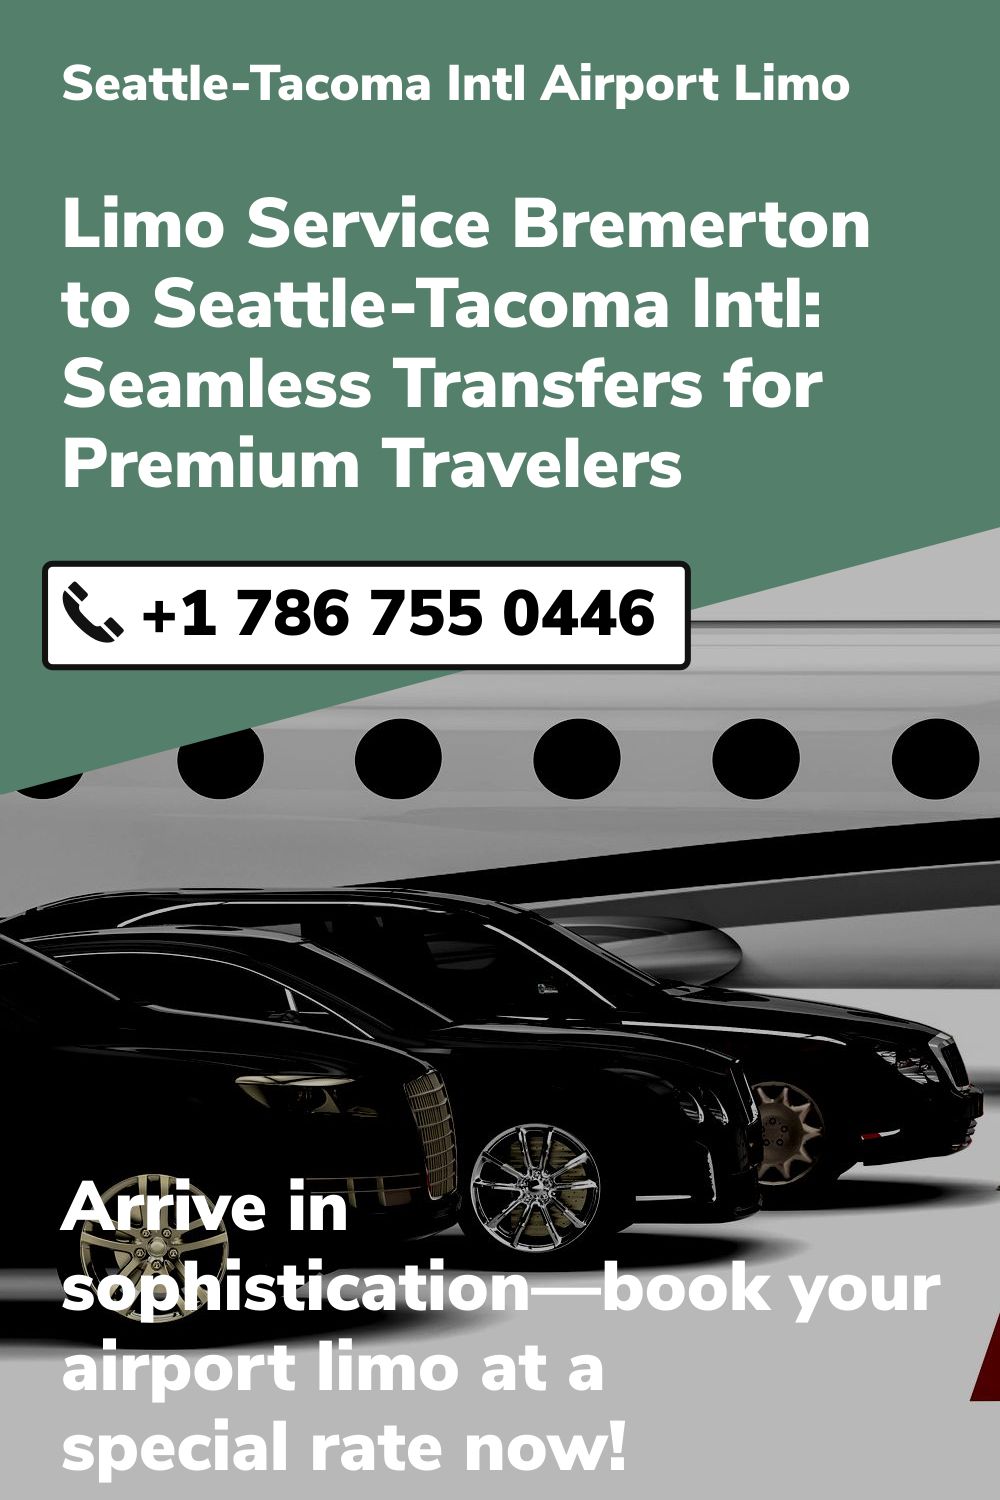 Seattle-Tacoma Intl Airport Limo